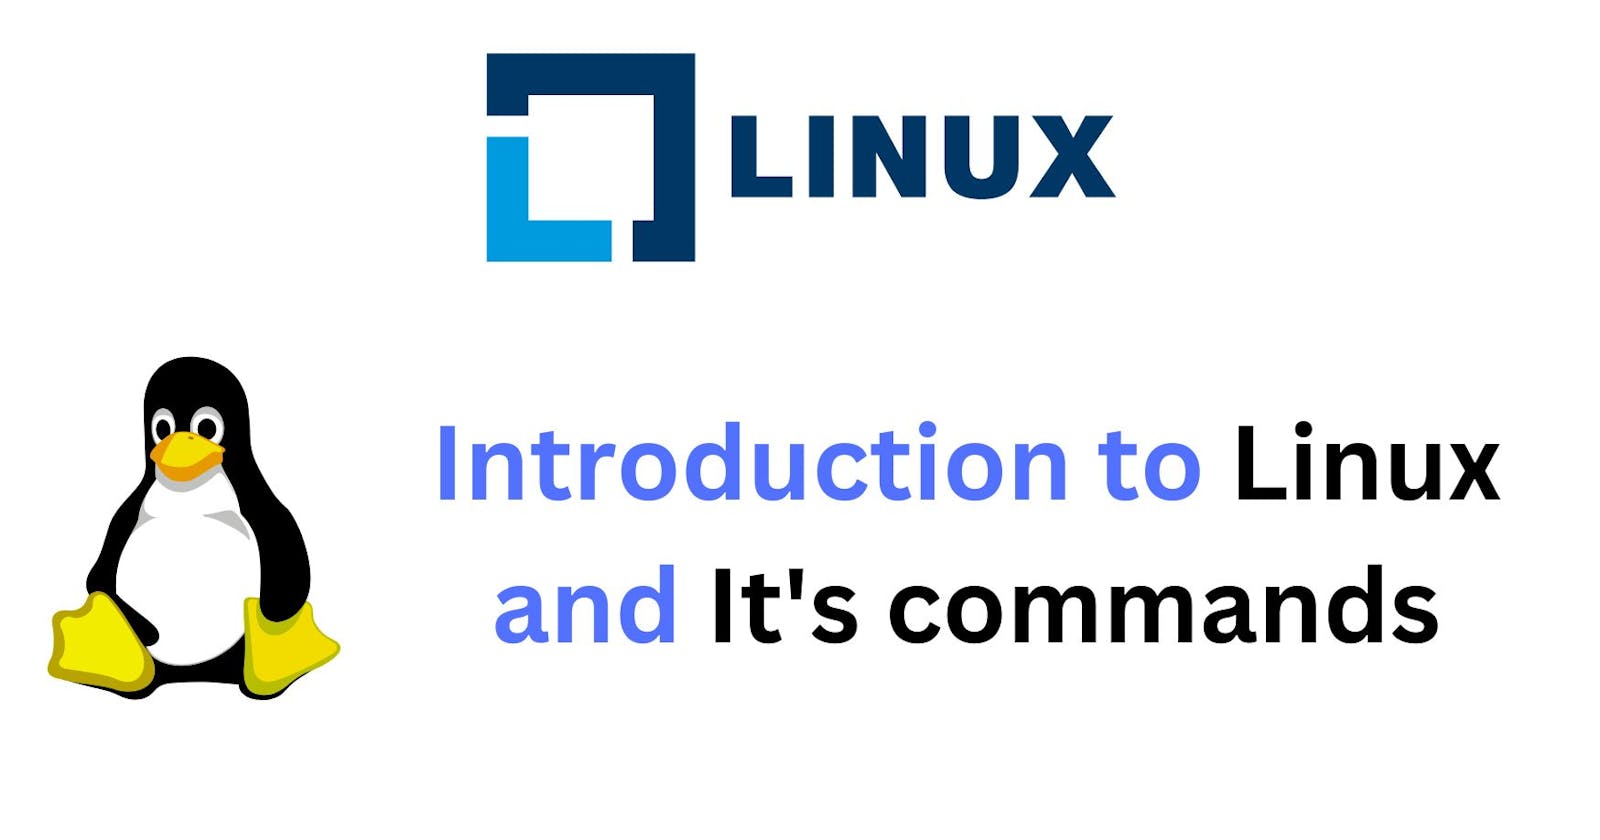 Introduction to Linux and important Linux commands that you should know